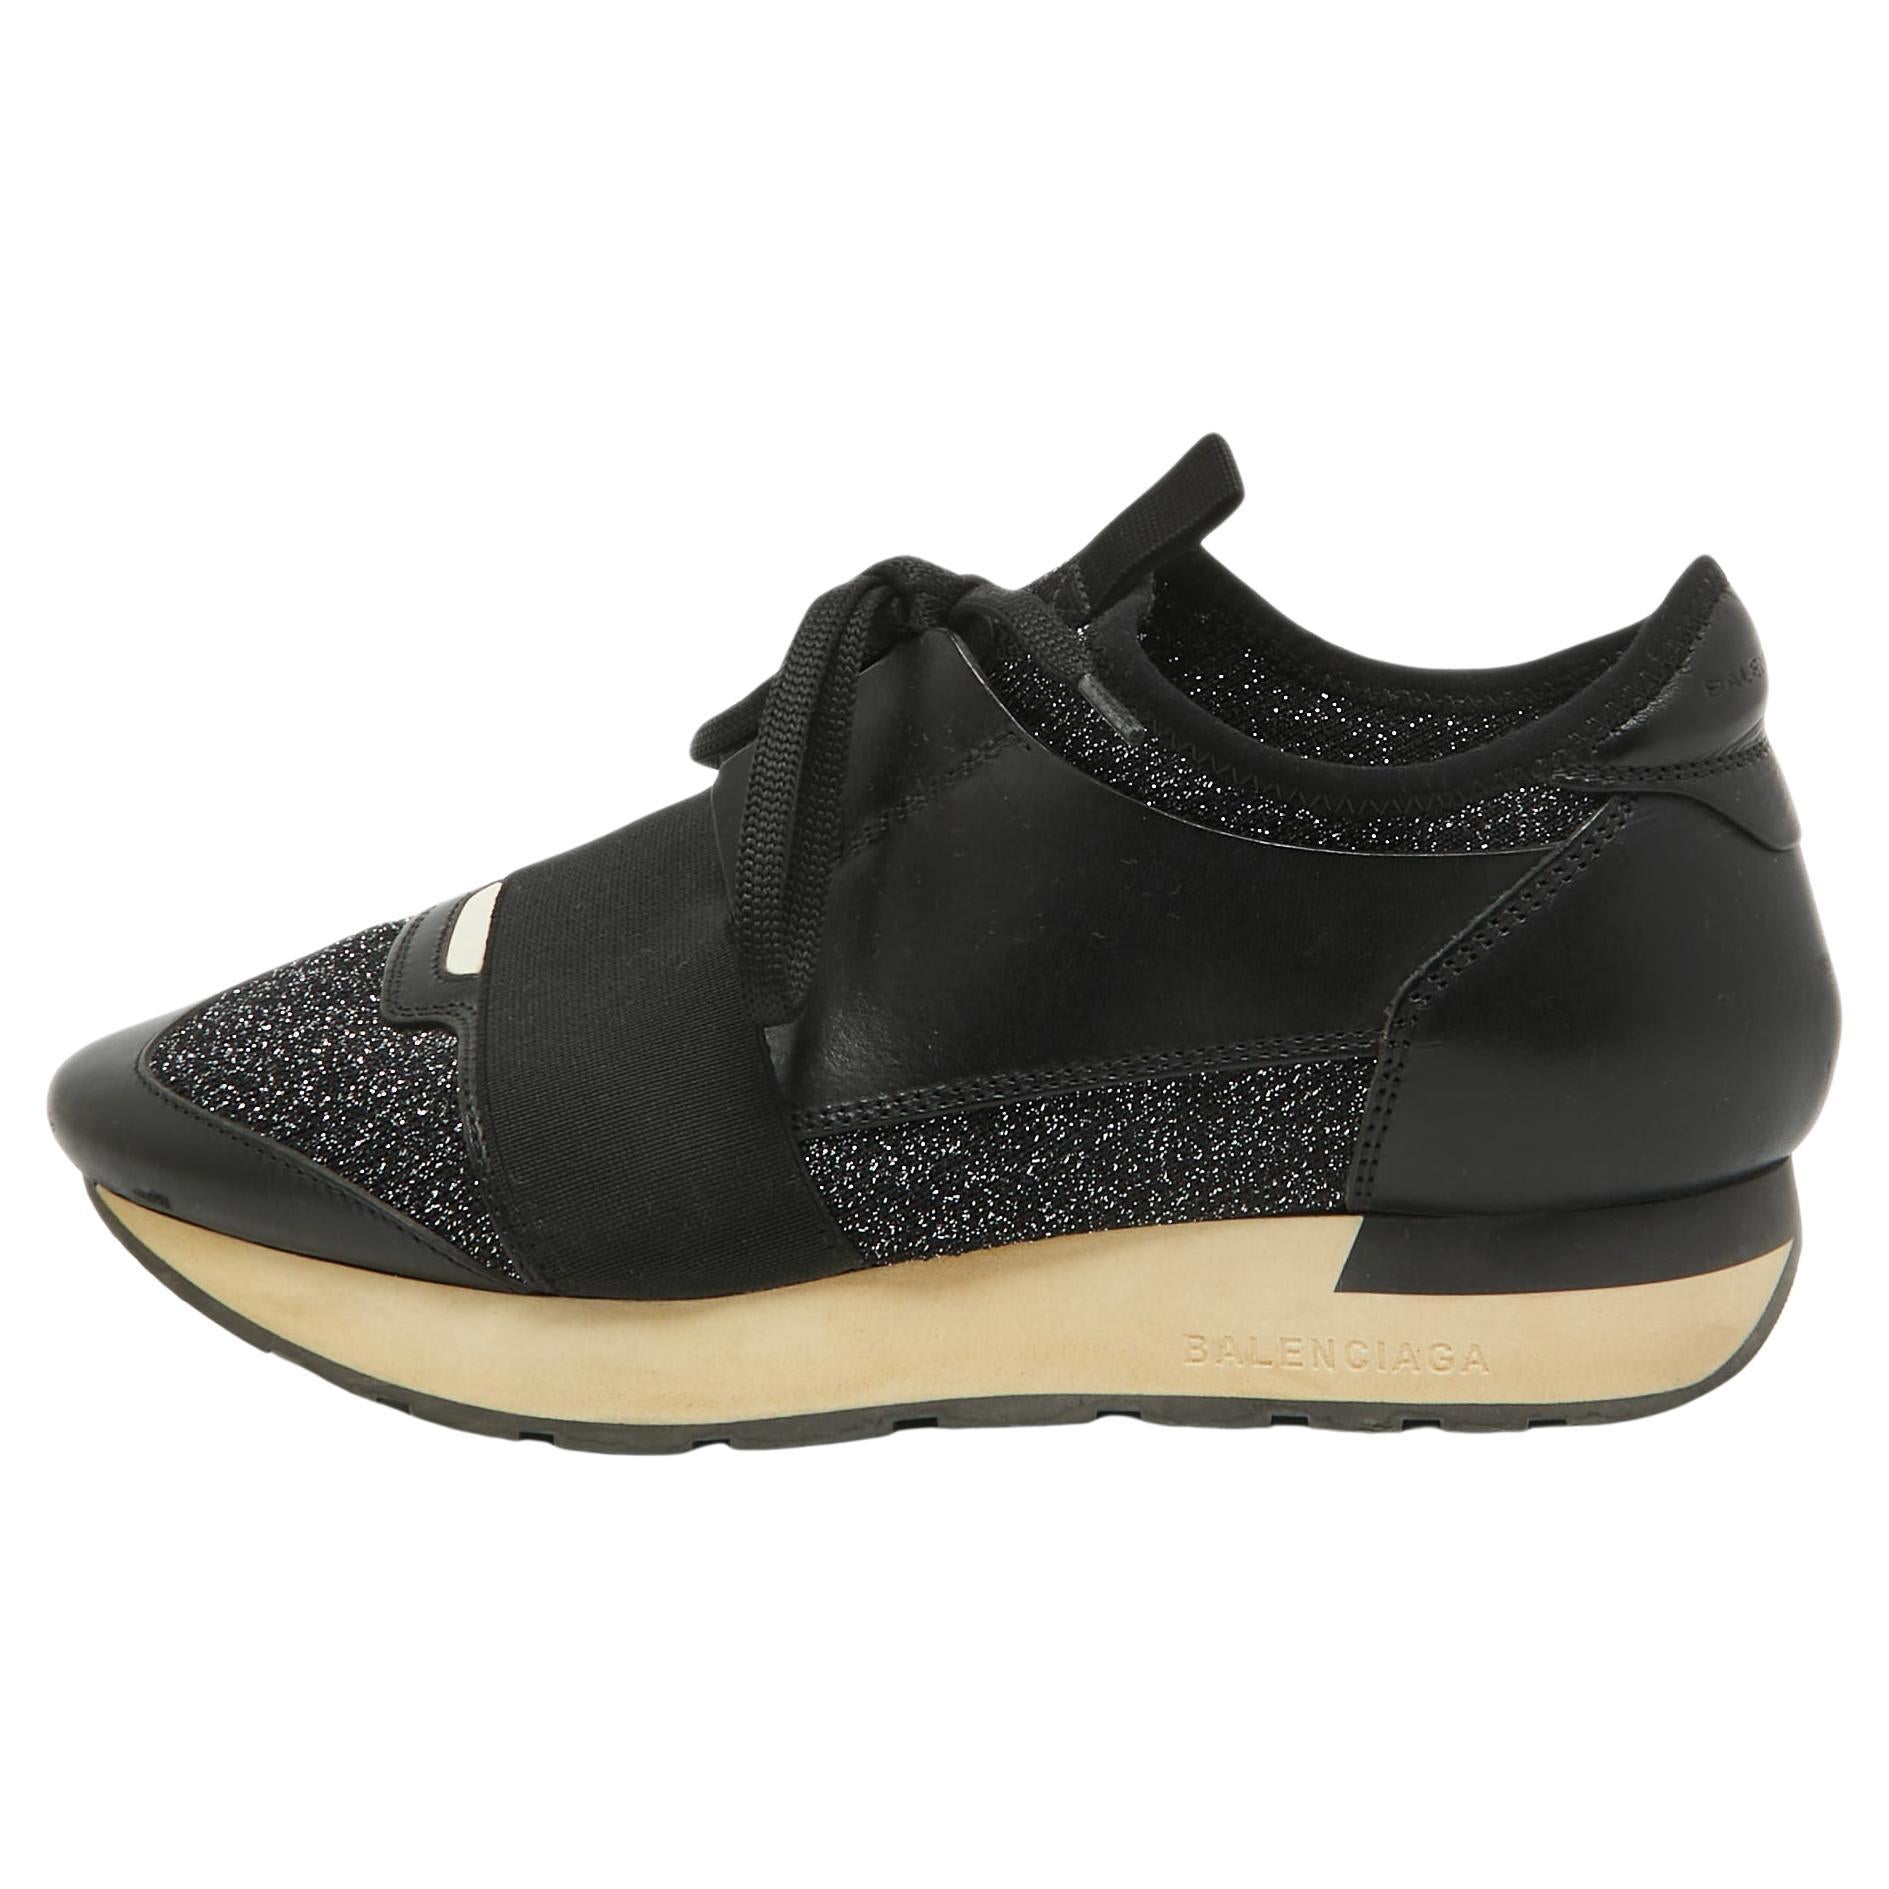 Balenciaga Black Leather and Glitter Knit Fabric Race Runner Sneakers Size 37 For Sale